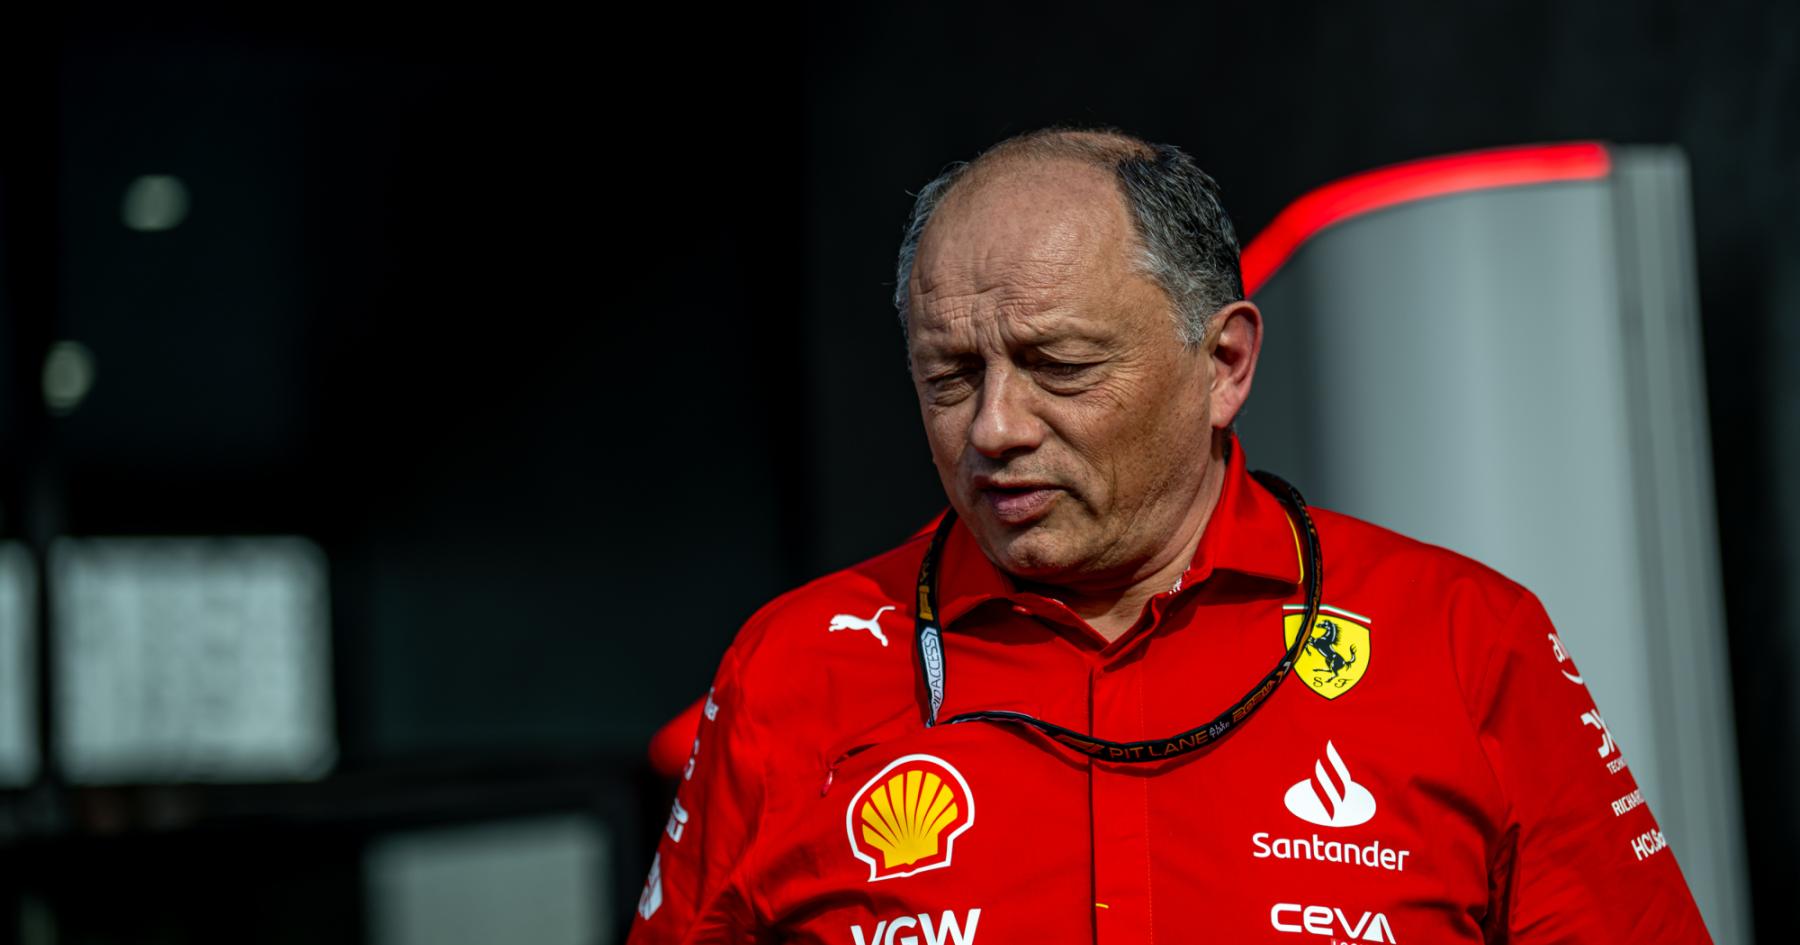 Optimism Abounds as Vasseur Leads Ferrari's Charge in Pursuit of Red Bull Dominance